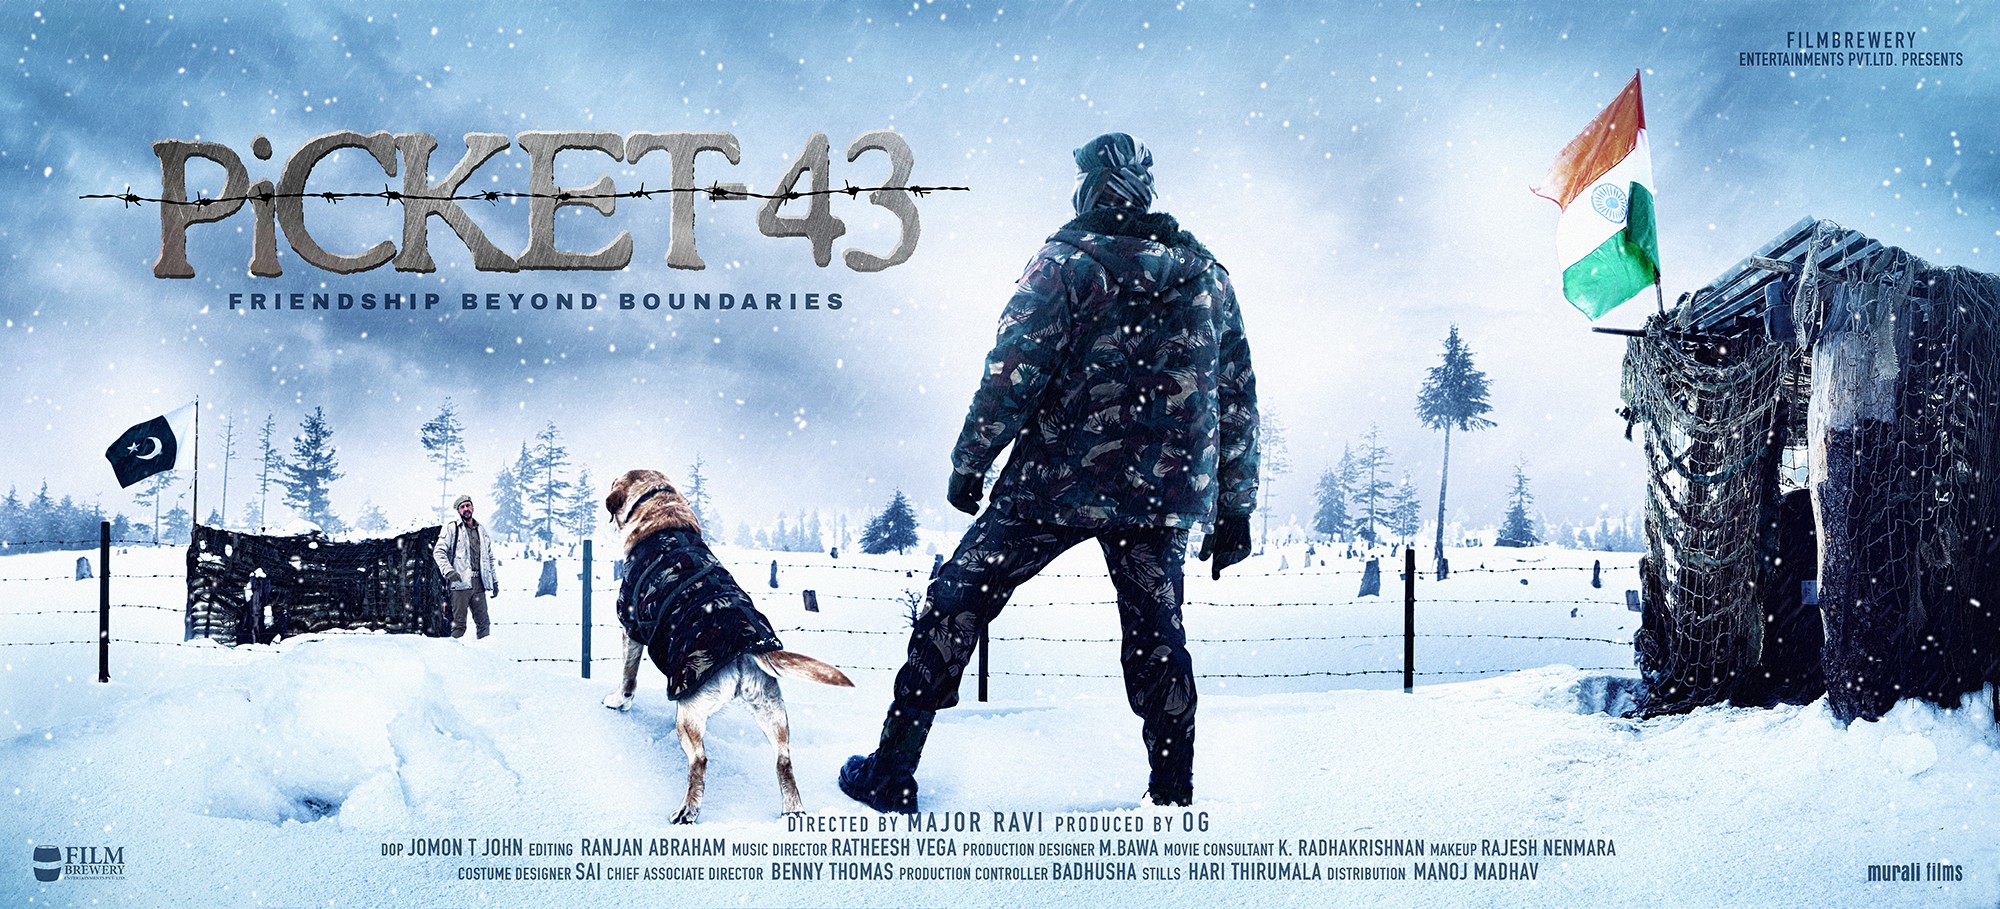 Mega Sized Movie Poster Image for Picket 43 (#4 of 8)